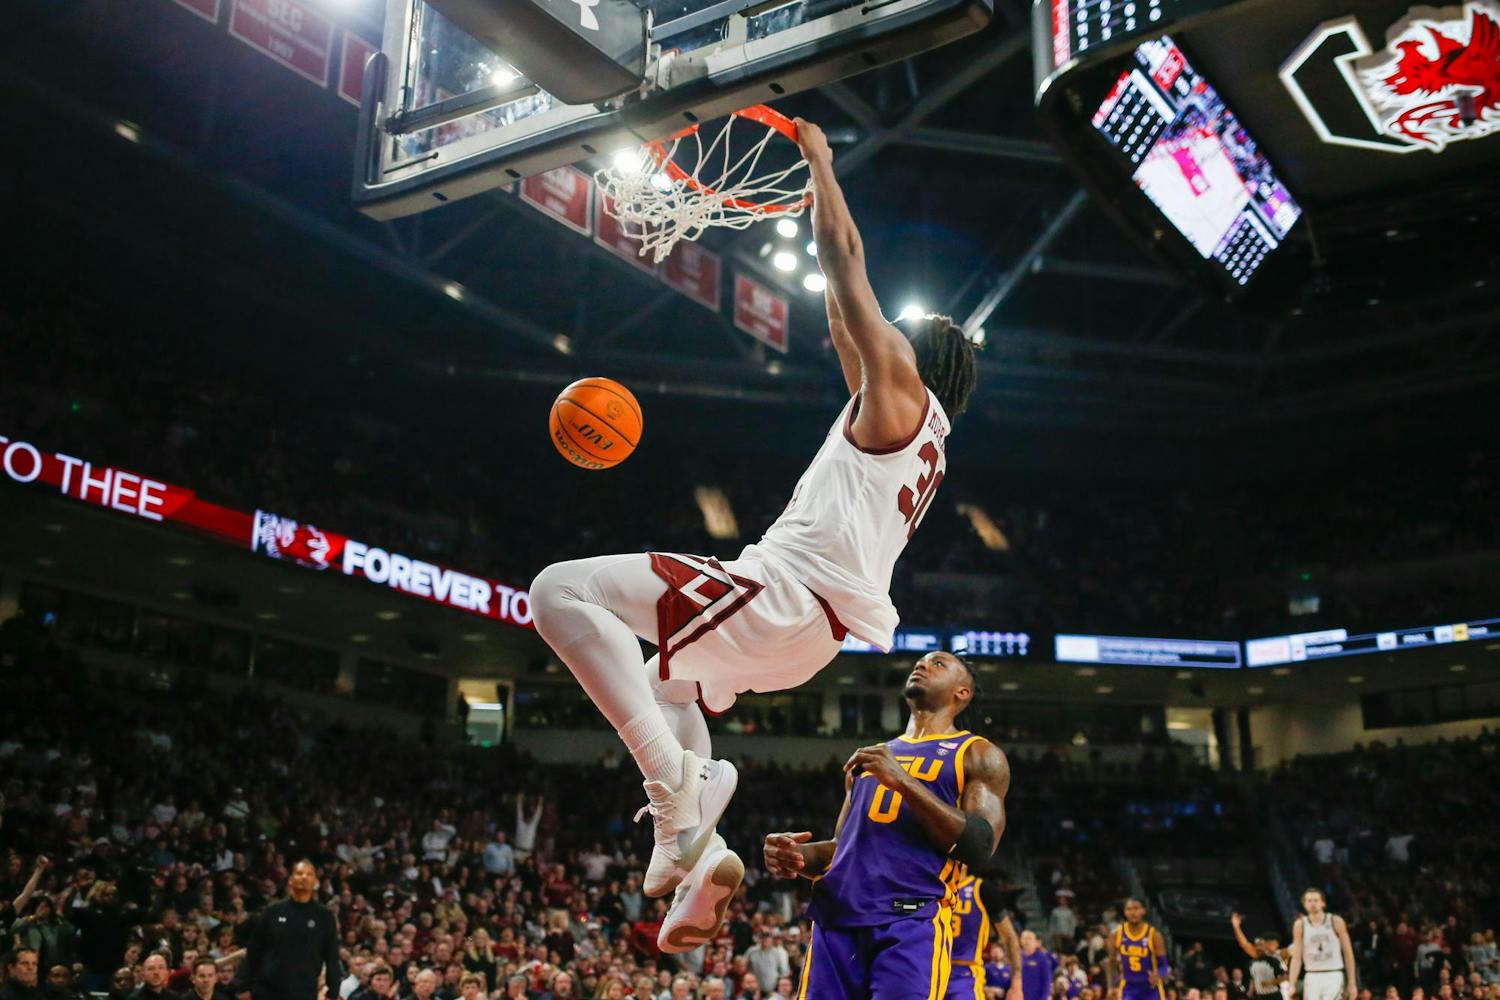 FILE- Freshman forward Collin Murray-Boyles hangs on the rim of the basket during South Carolina’s game against LSU at Colonial Life Arena on Feb. 17, 2024. The Gamecocks defeated the Arkansas Razorback 80-66 in the SEC tournament on March 14, 2024, and Murray-Boyles led scoring with 24 points.